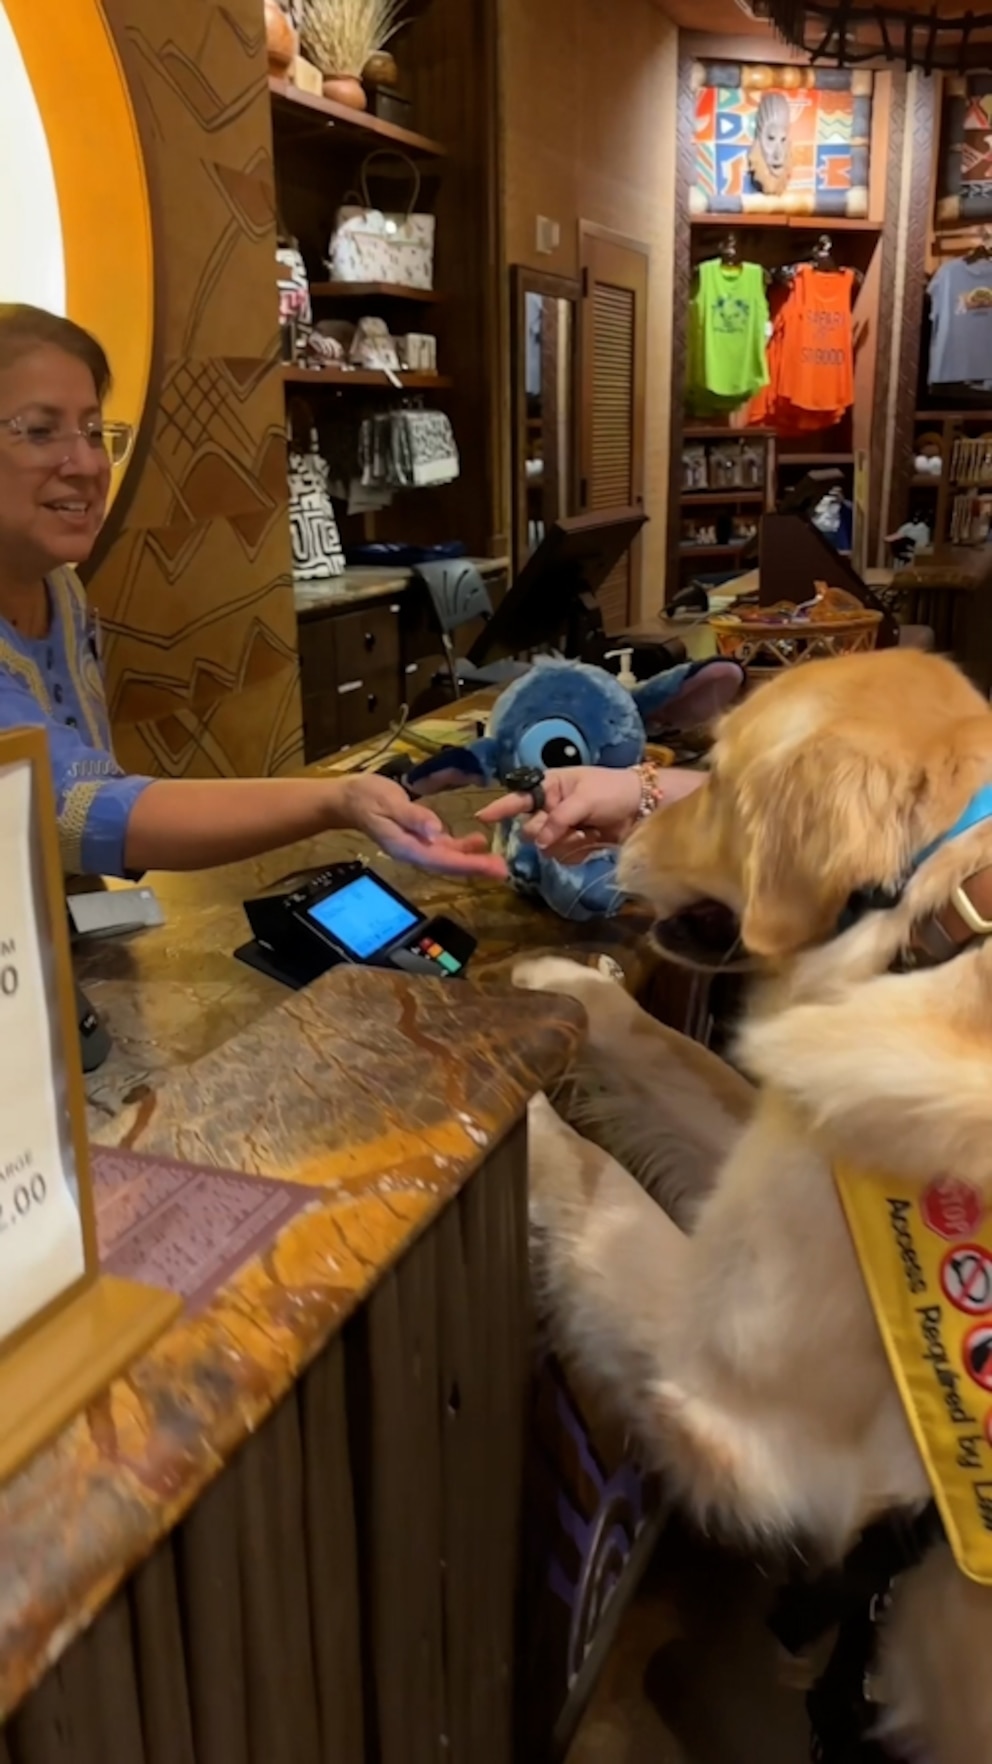 WATCH: Service dog picks out his own toy and pays for it